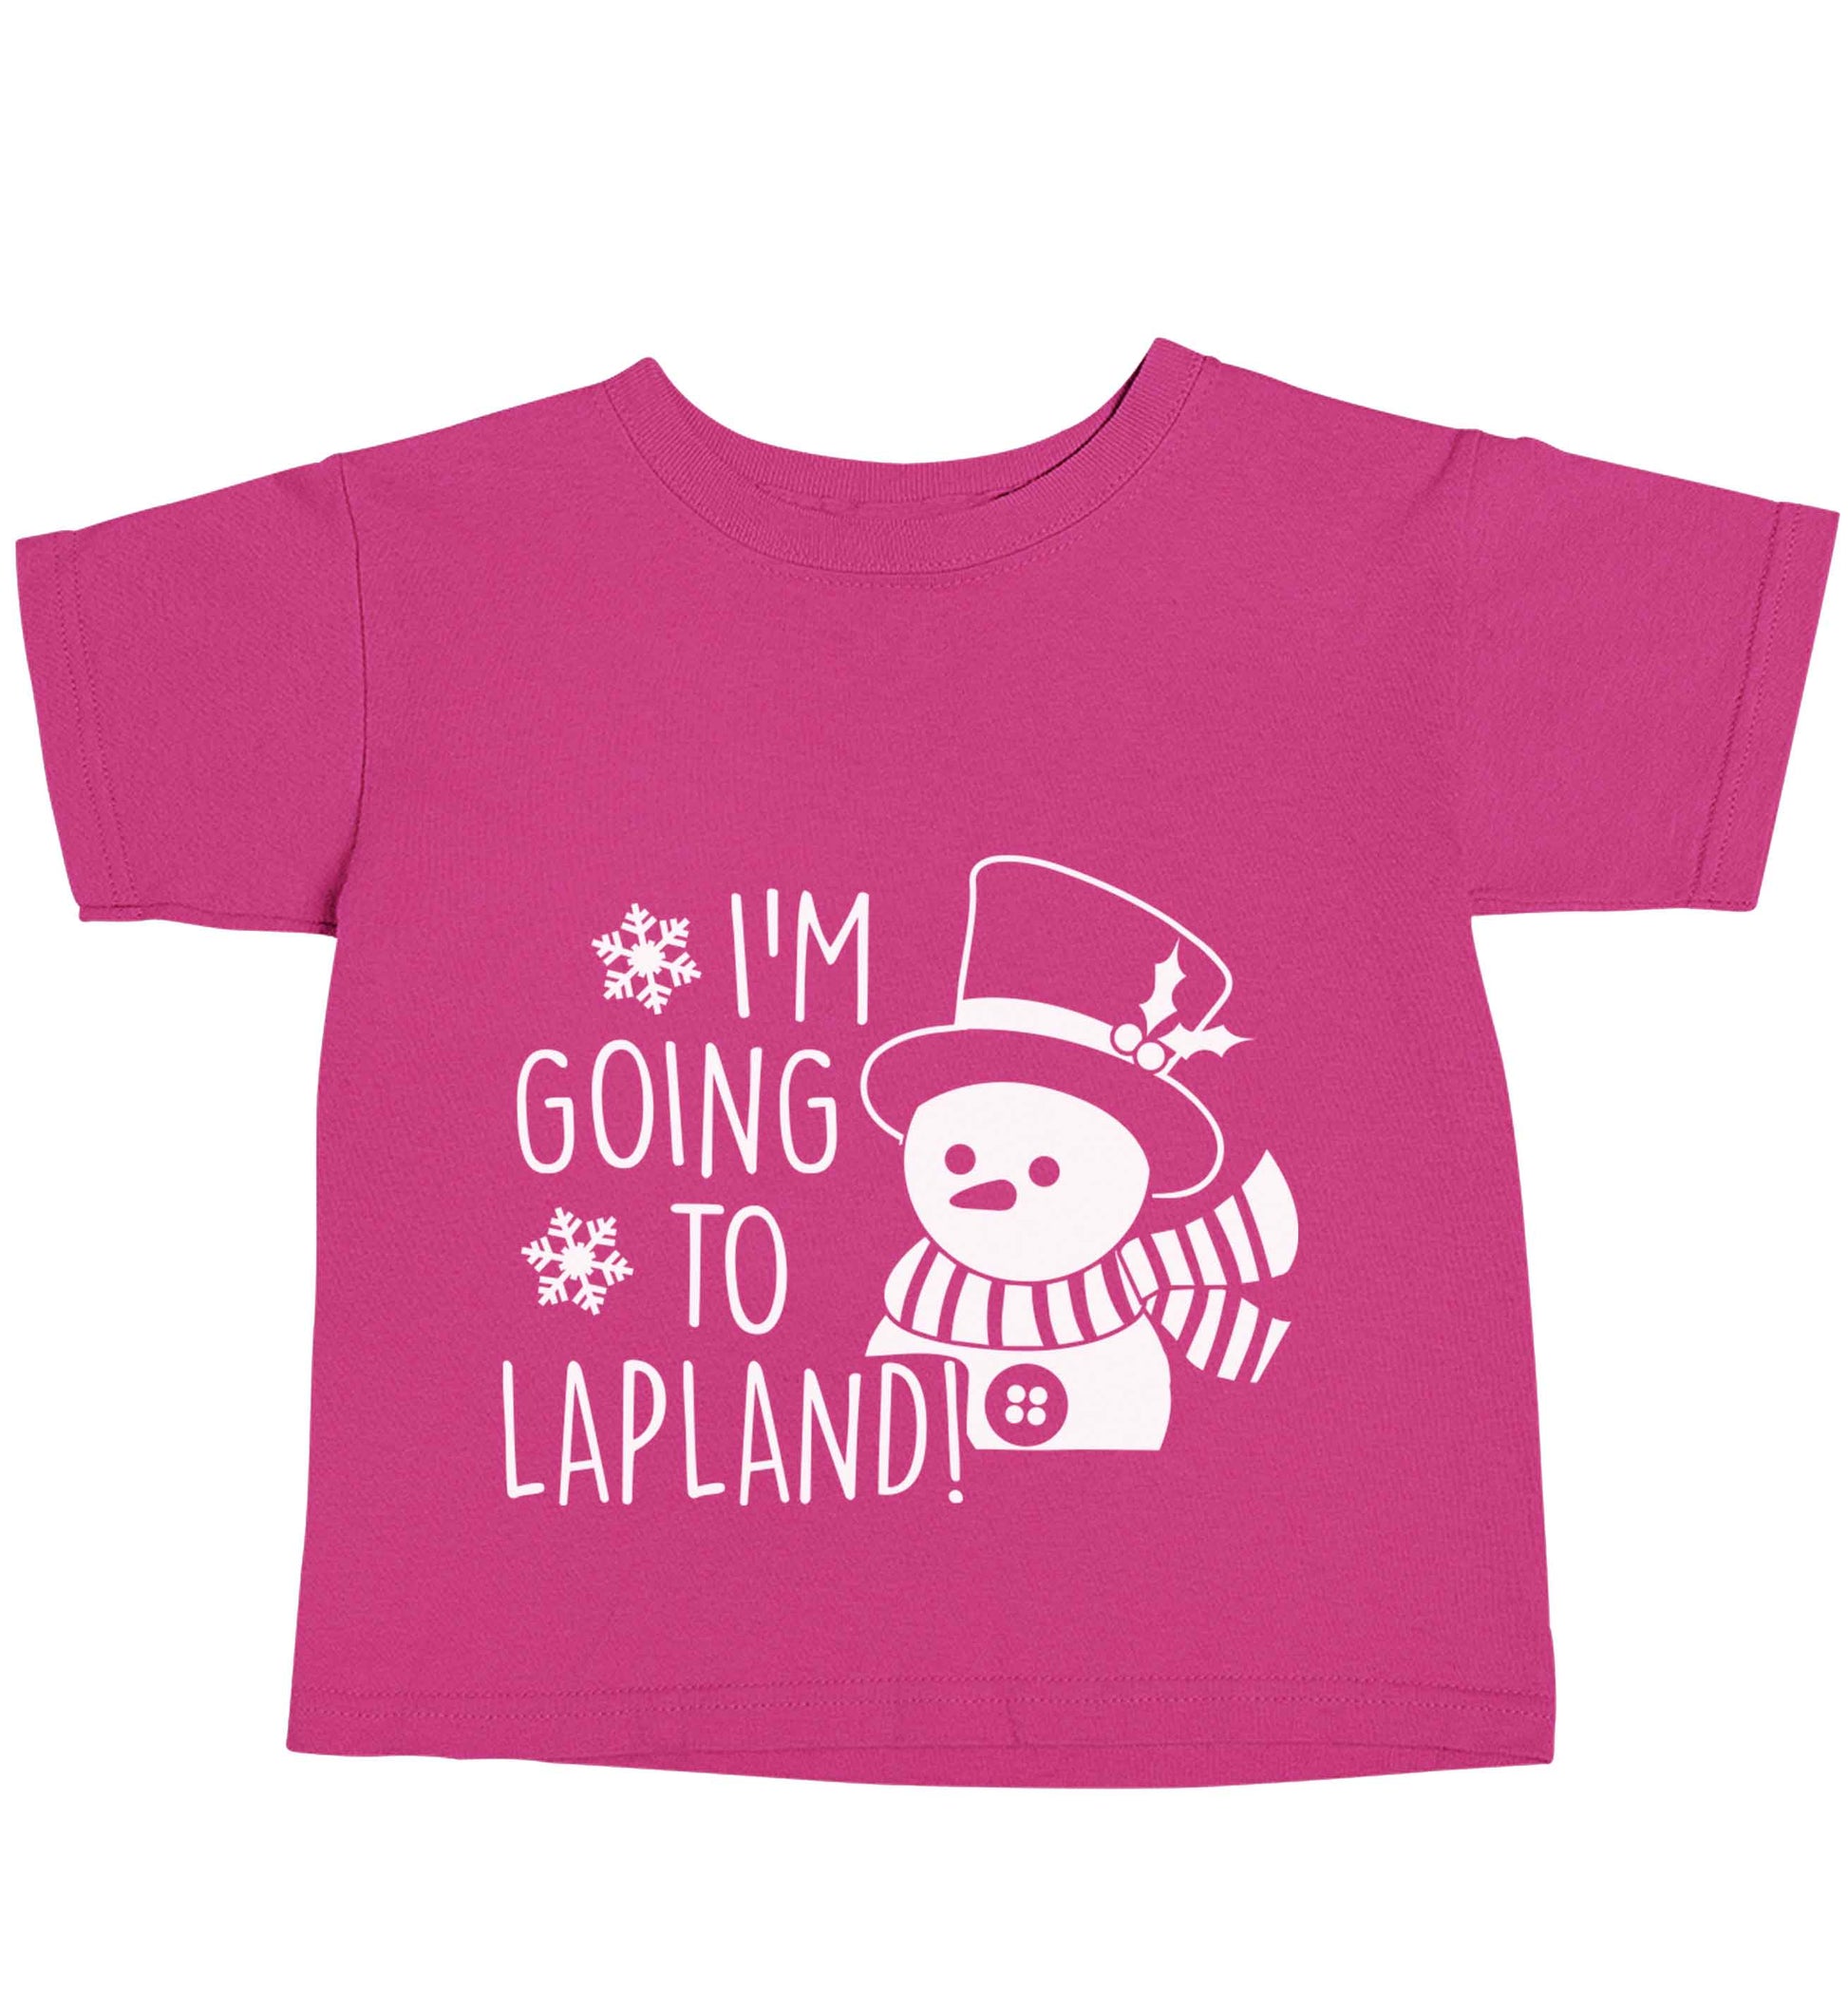 I'm going to Lapland pink baby toddler Tshirt 2 Years